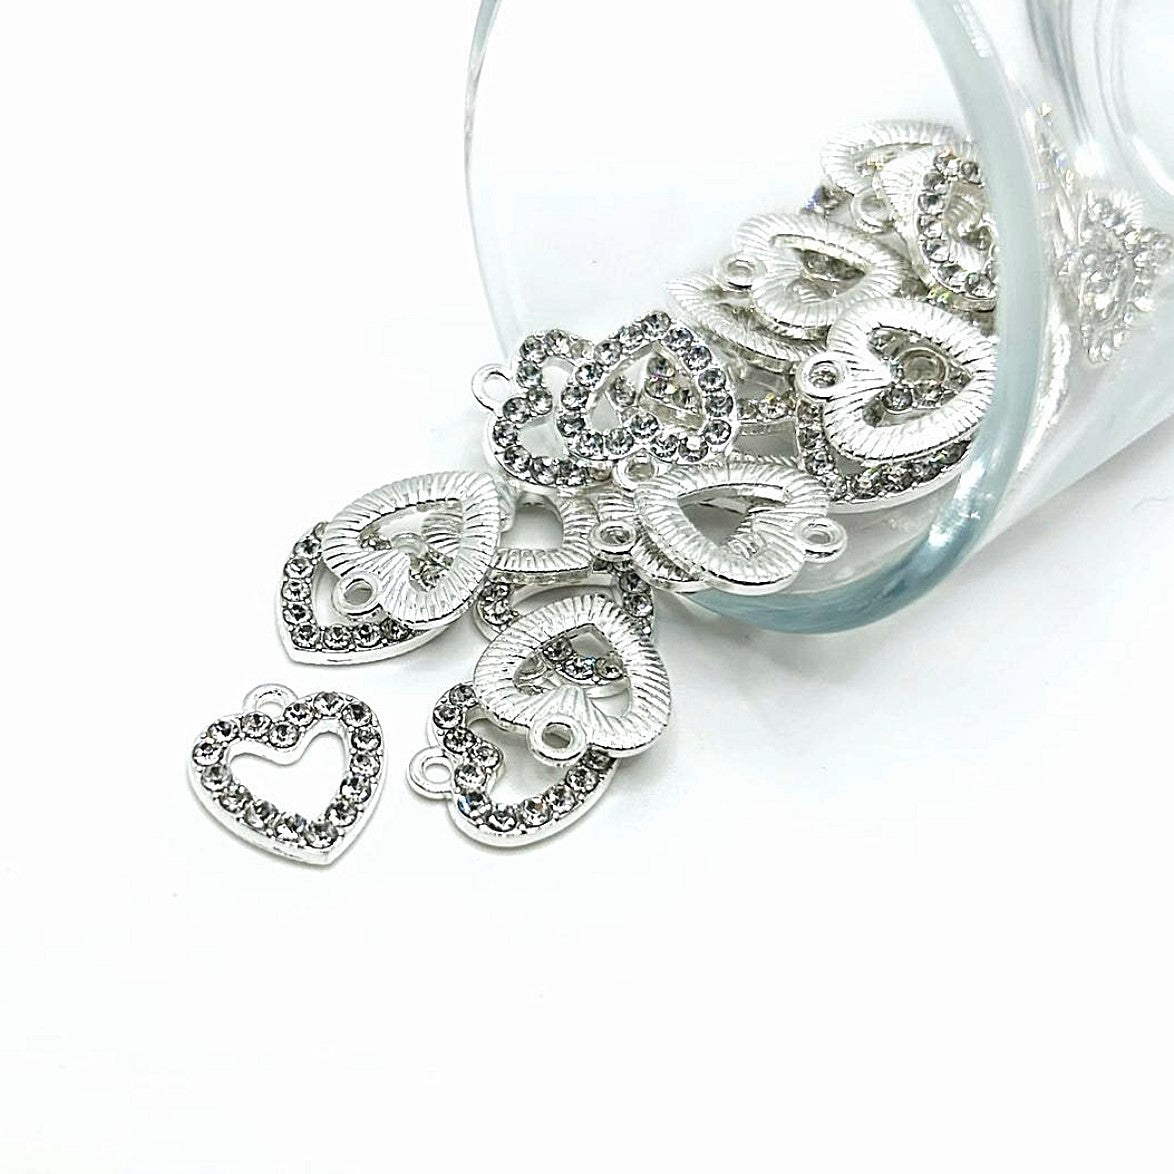 1, 4, 20 or 50 Pieces: Silver Plated Rhinestone Heart Charms